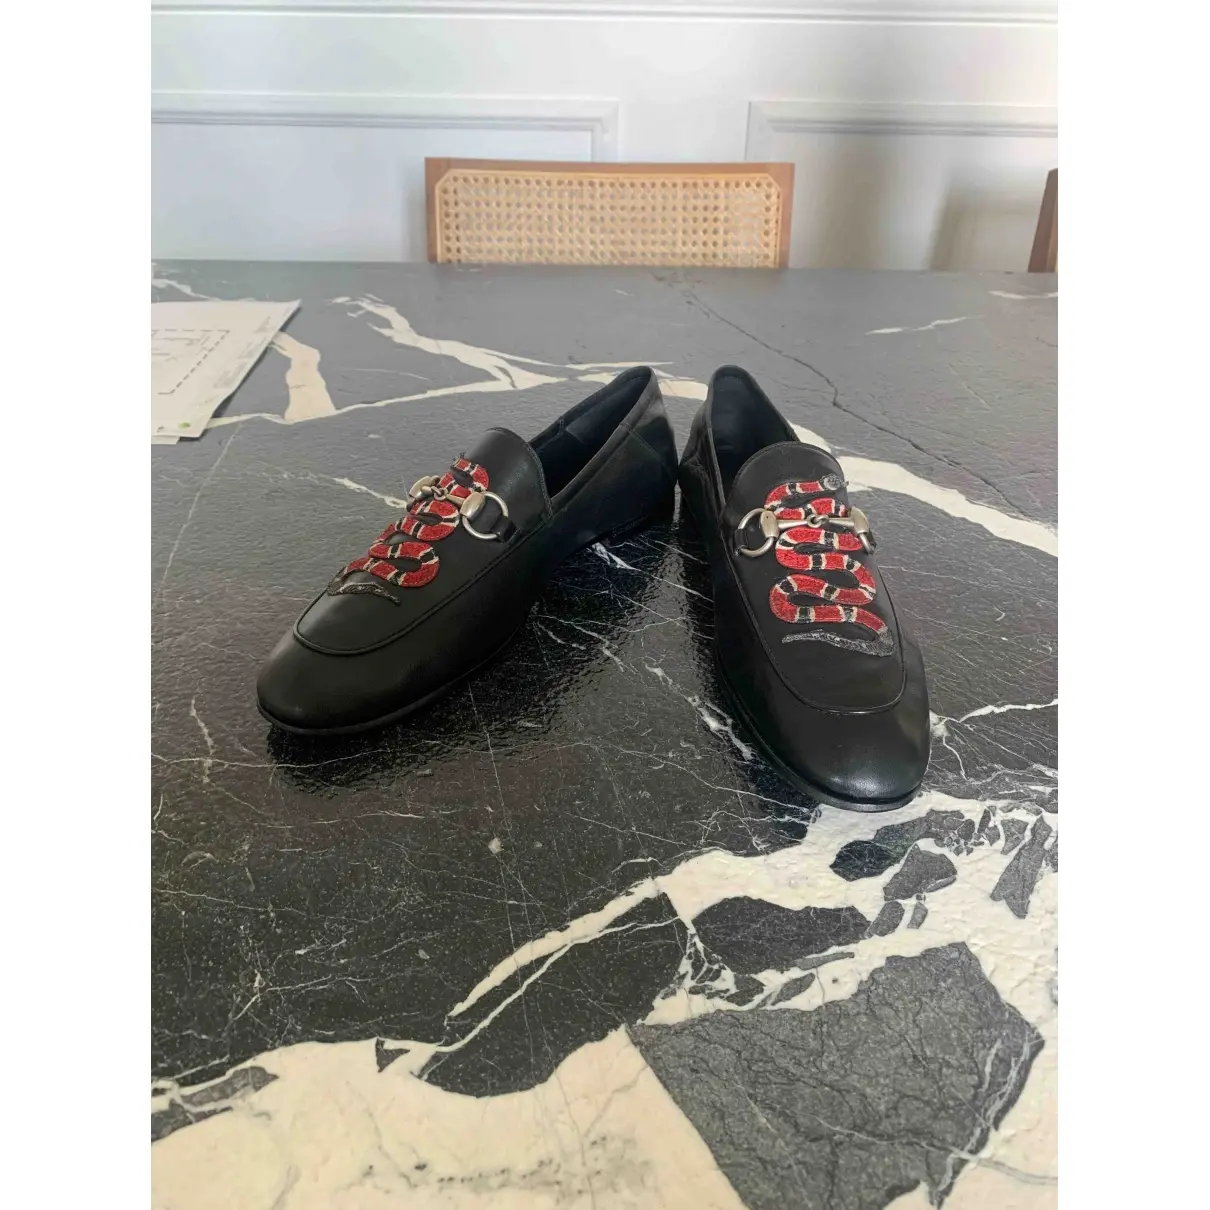 Gucci Brixton leather flats for sale